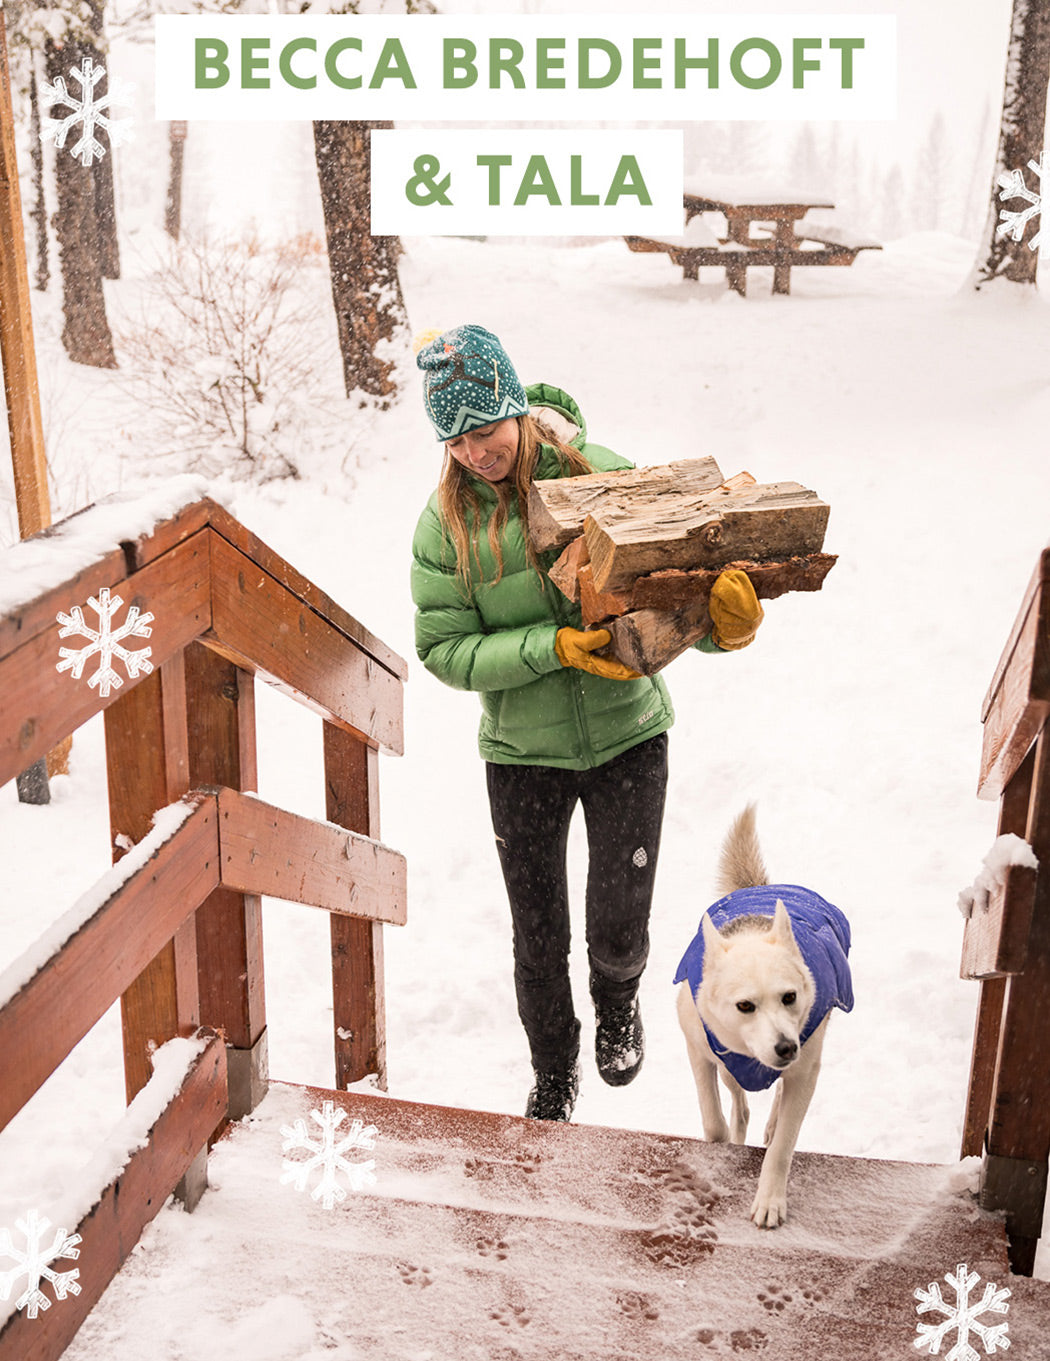 Becca carries firewood up the stairs with Tala at her side.